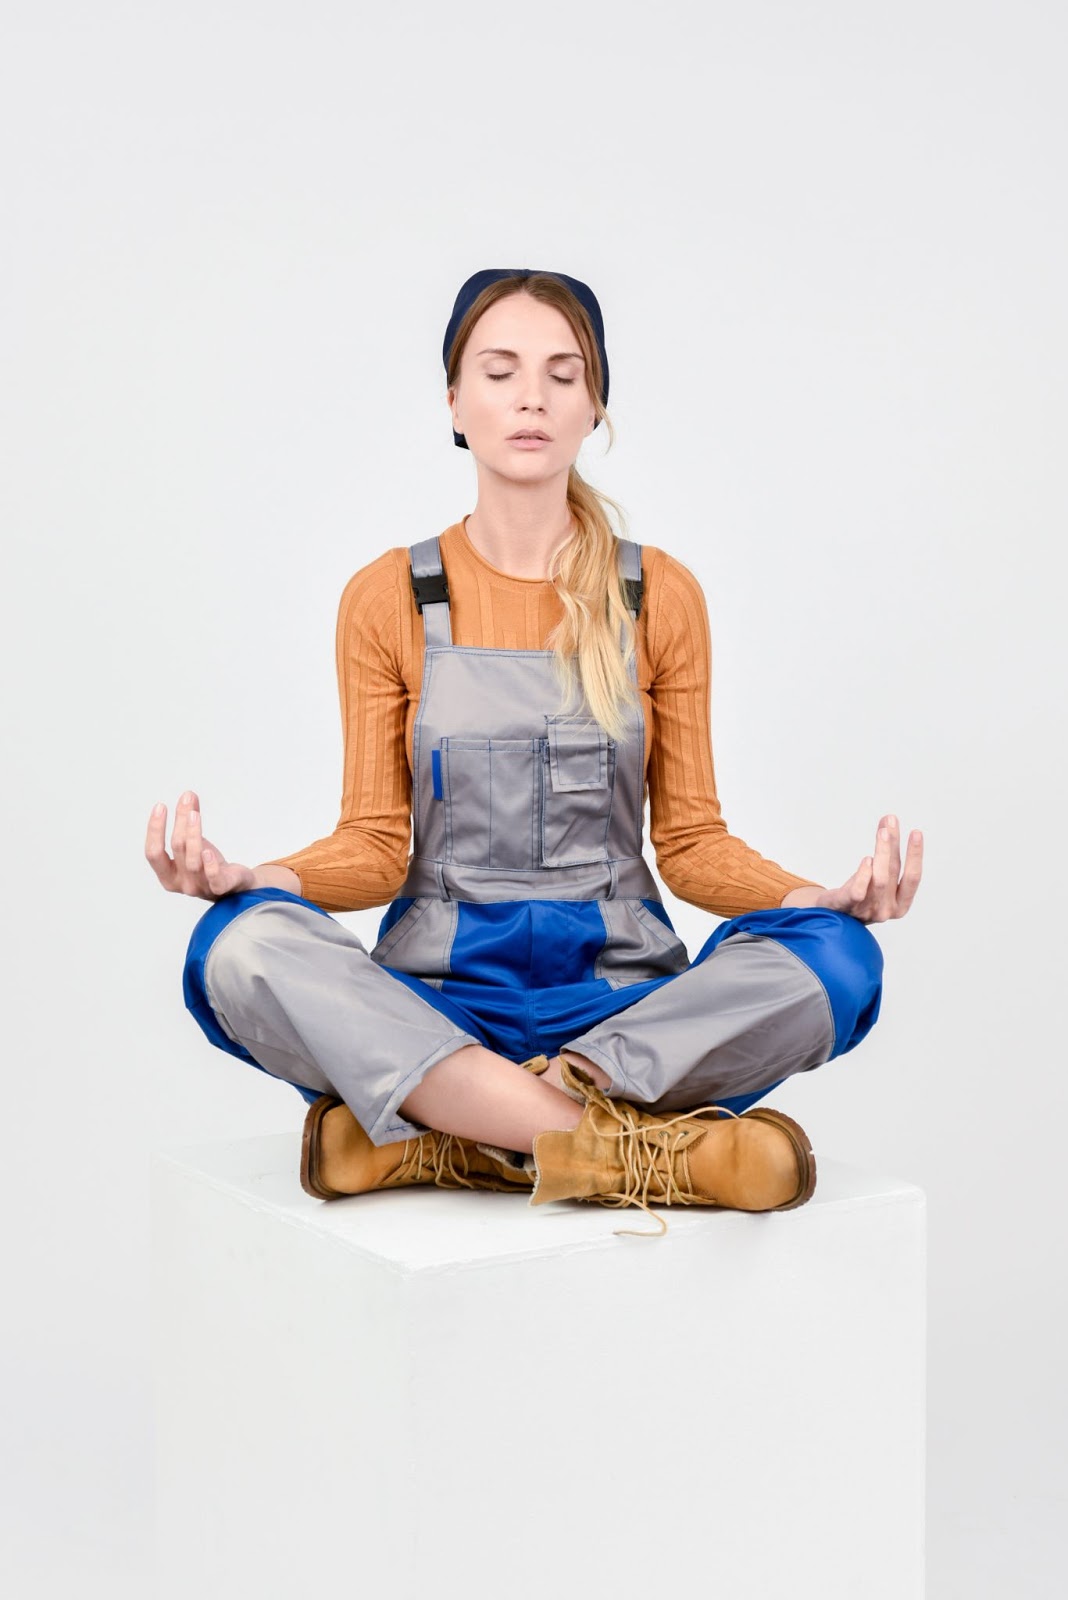 Get calm: enjoy the graphic set for the Yoga And Meditation day. Little meditation helps to start the workday